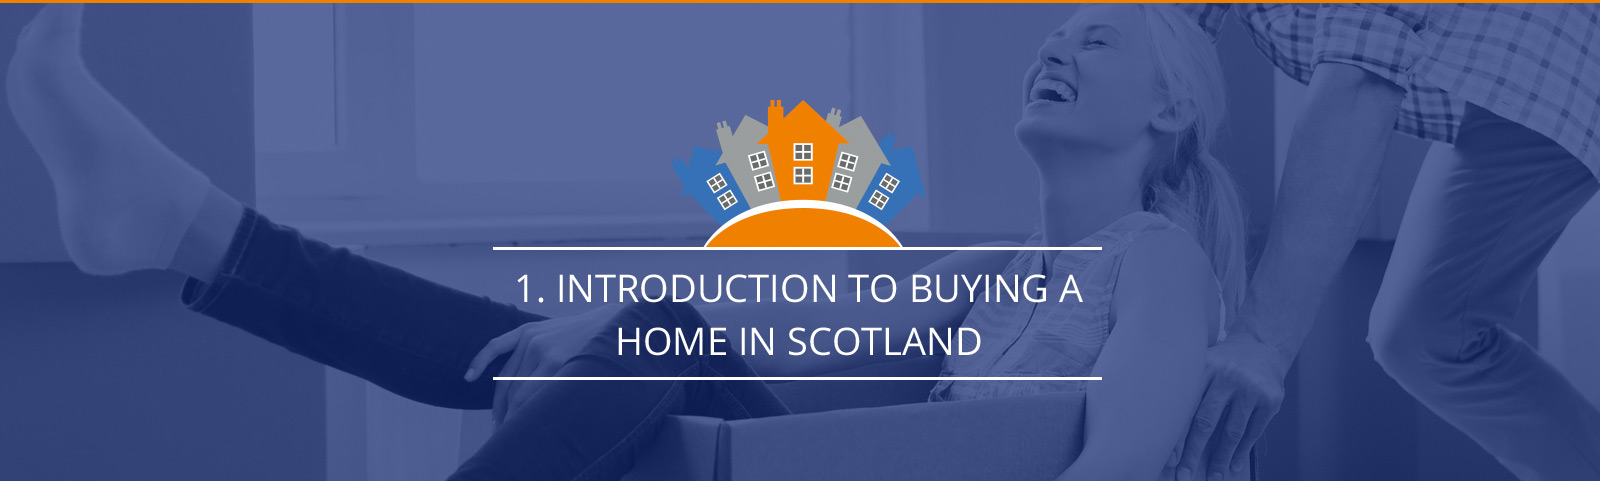 Introduction to buying a home in Scotland